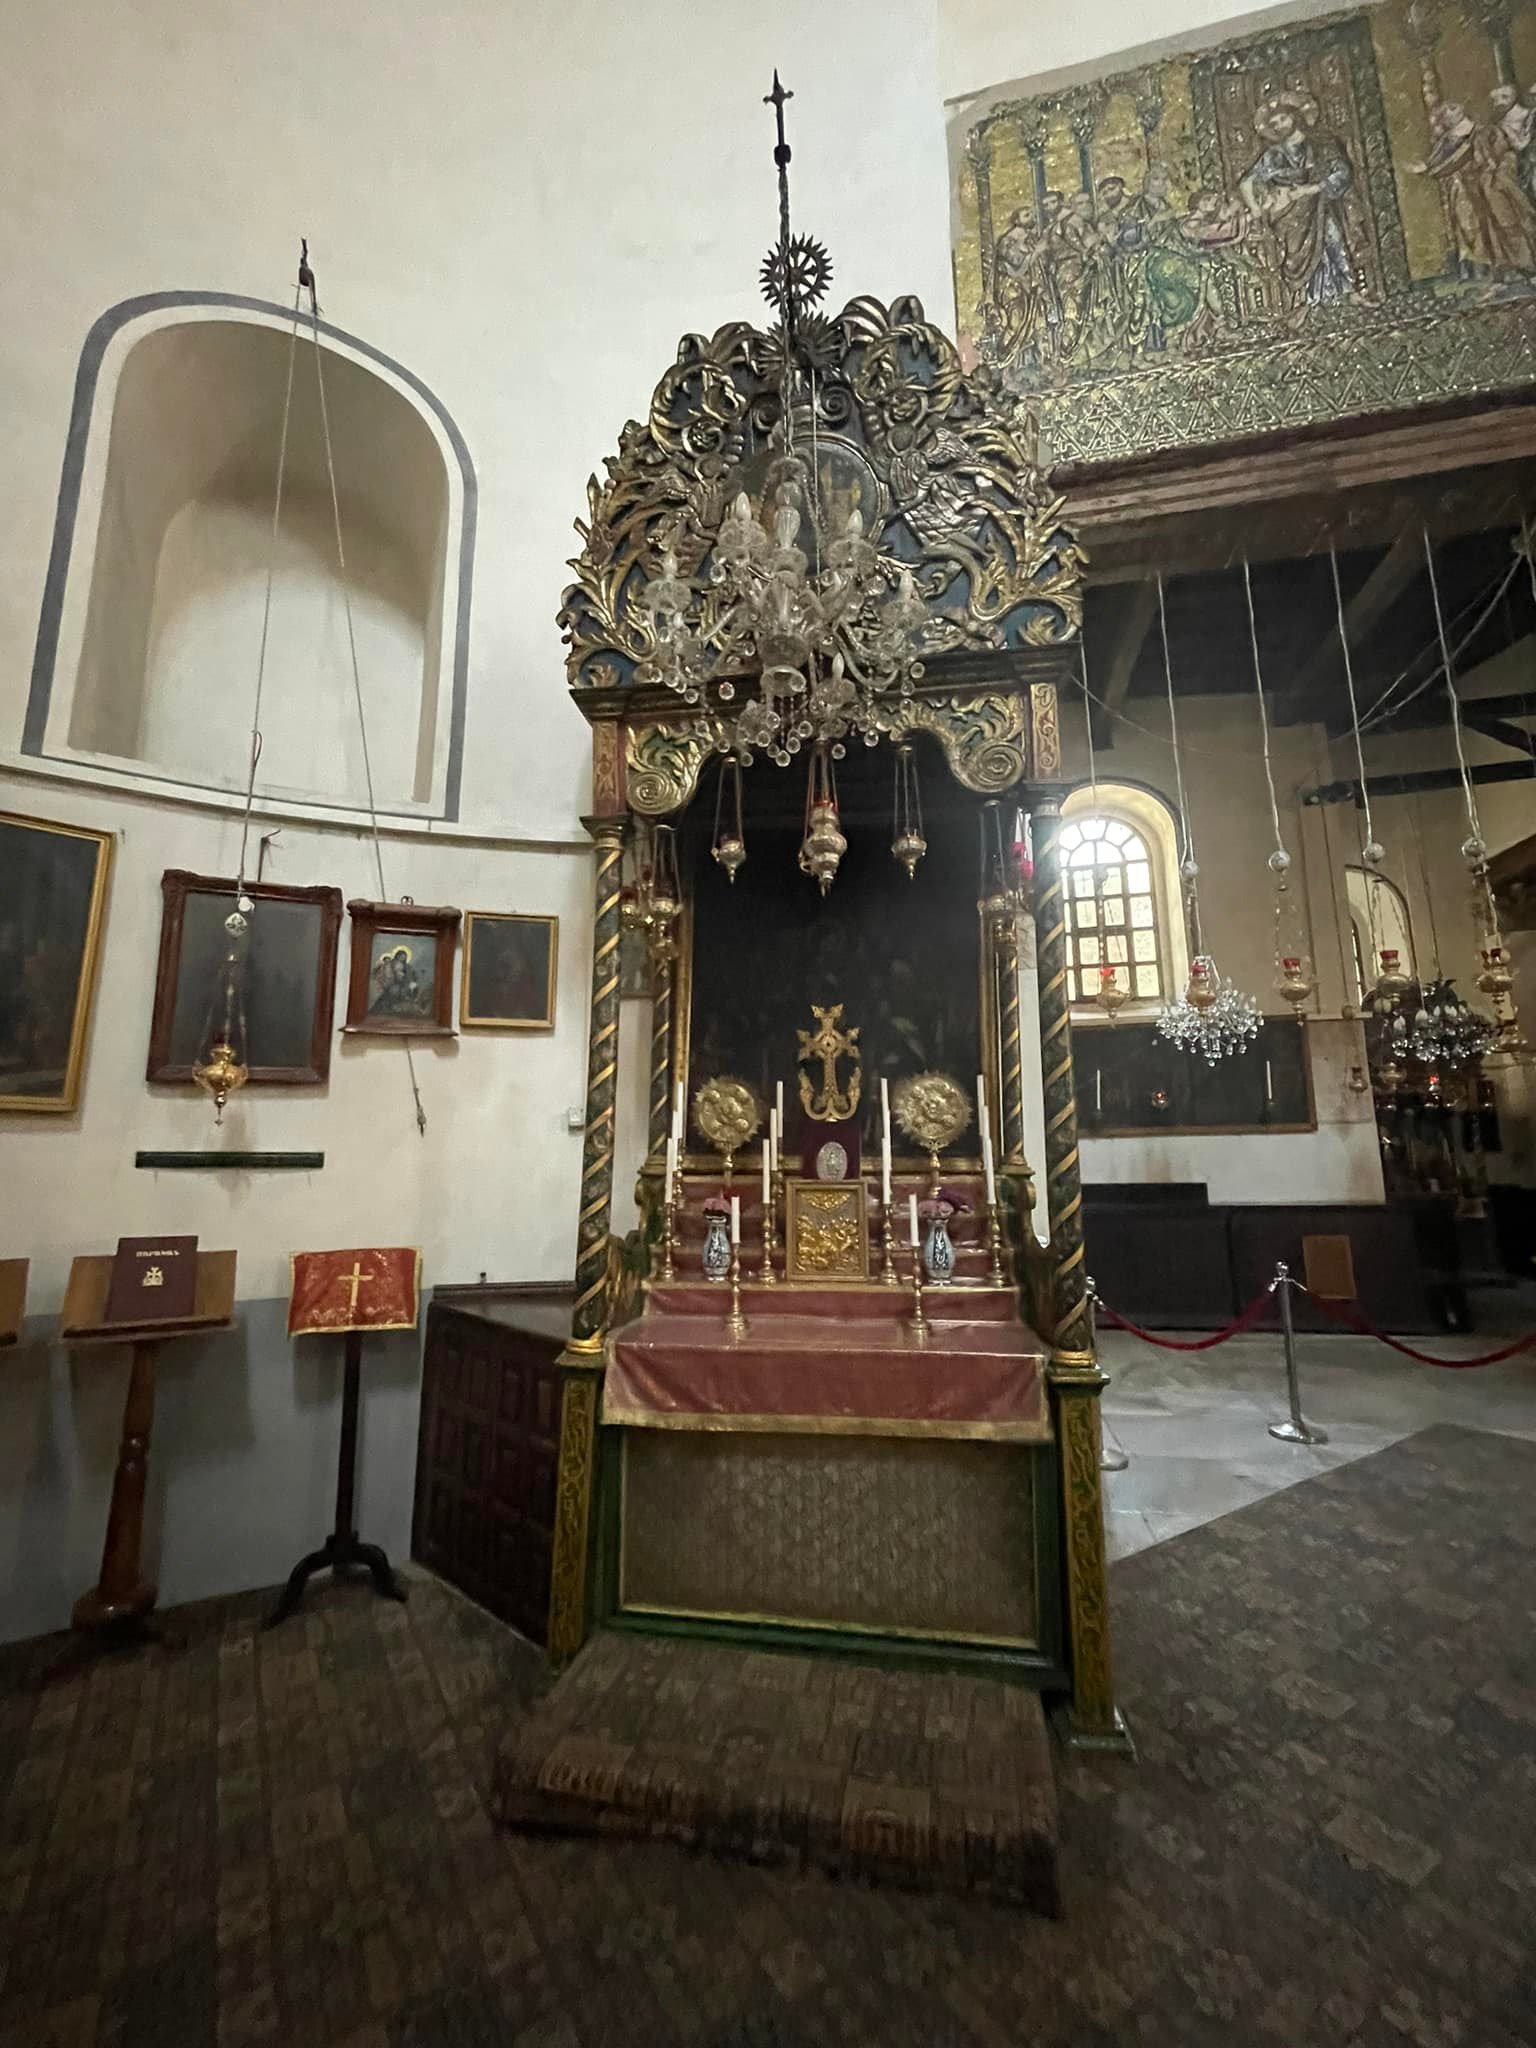  This is the Armenian churches sanctuary. They only actually have one family in Bethlehem. 